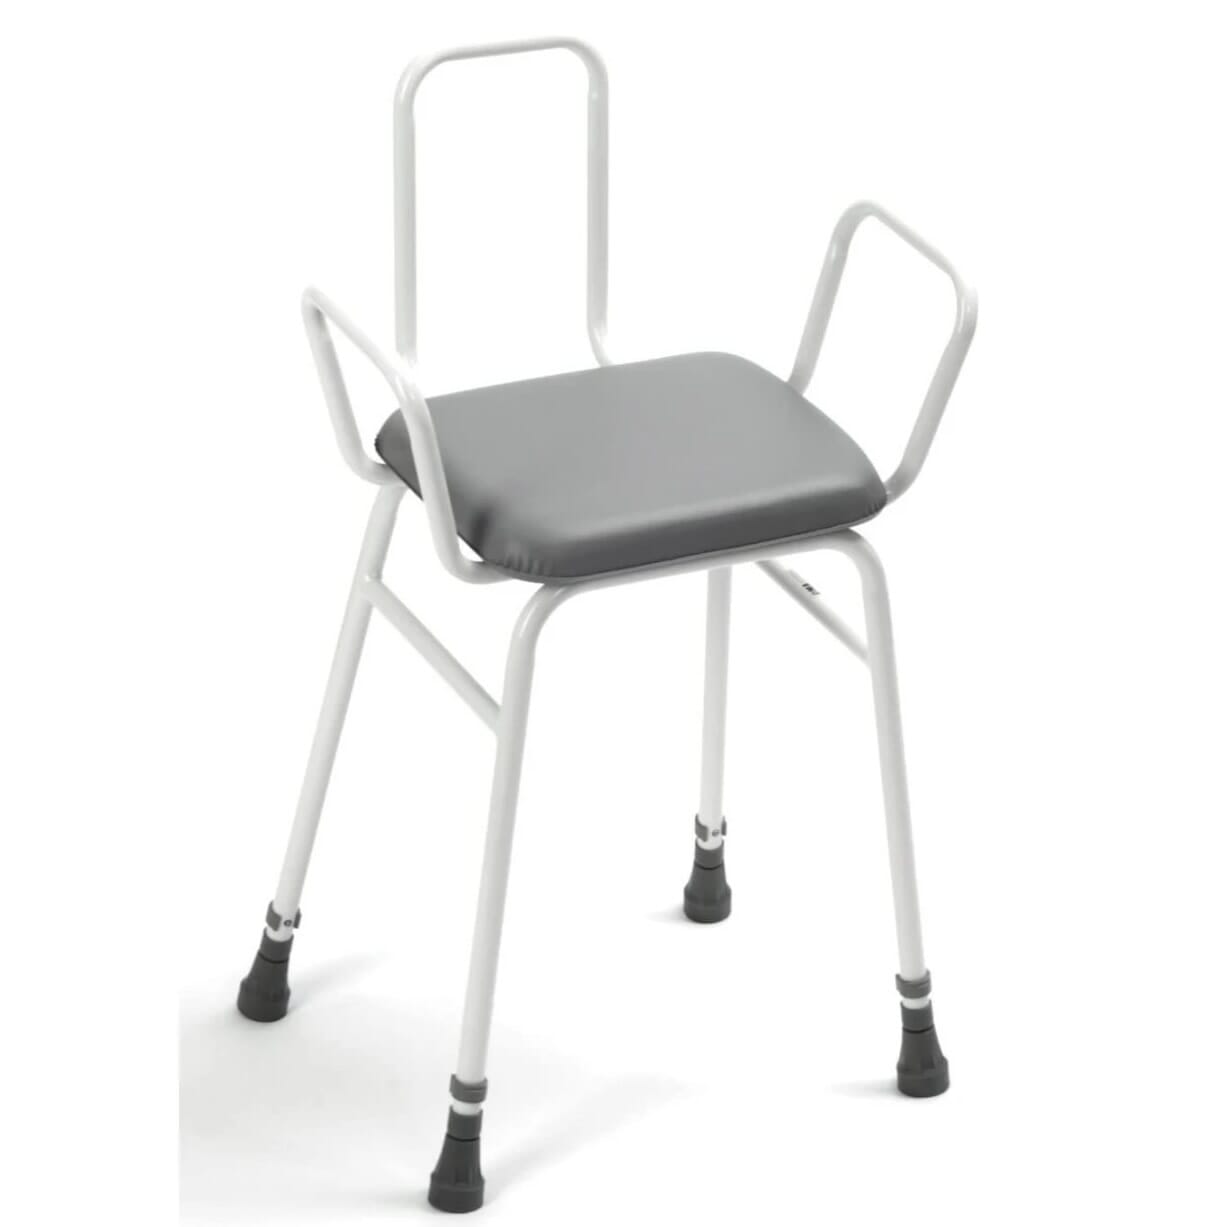 View Adjustable Height Perching StoolChair Adjustable Height Perching Stool with Arms Back information